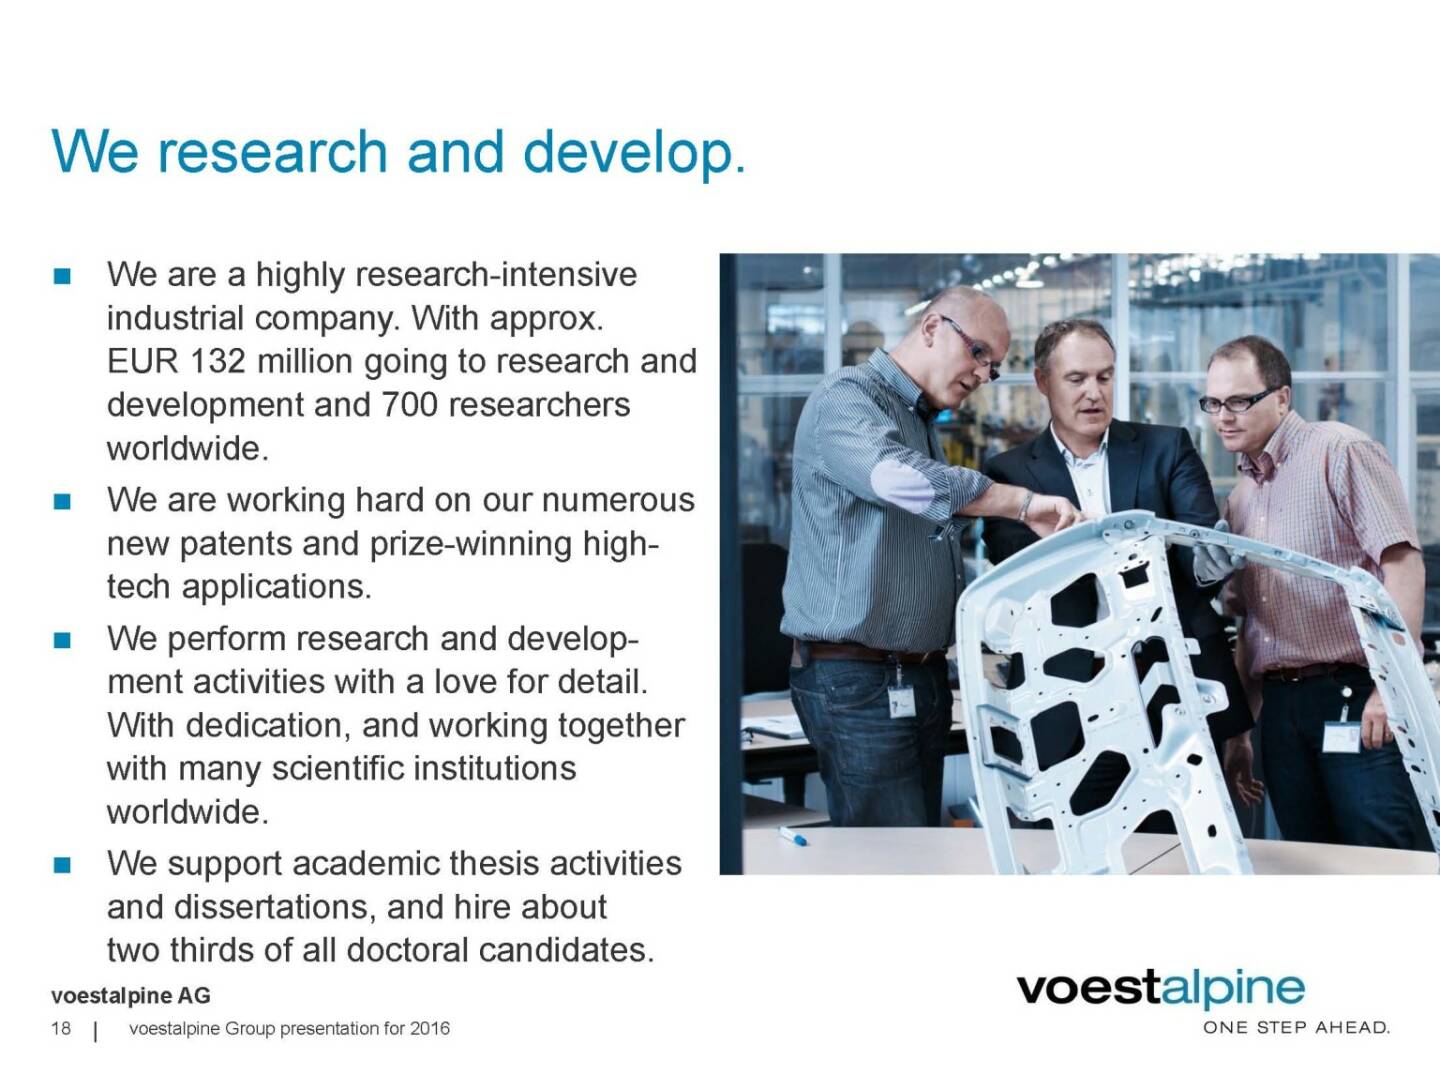 voestalpine - We research and develop